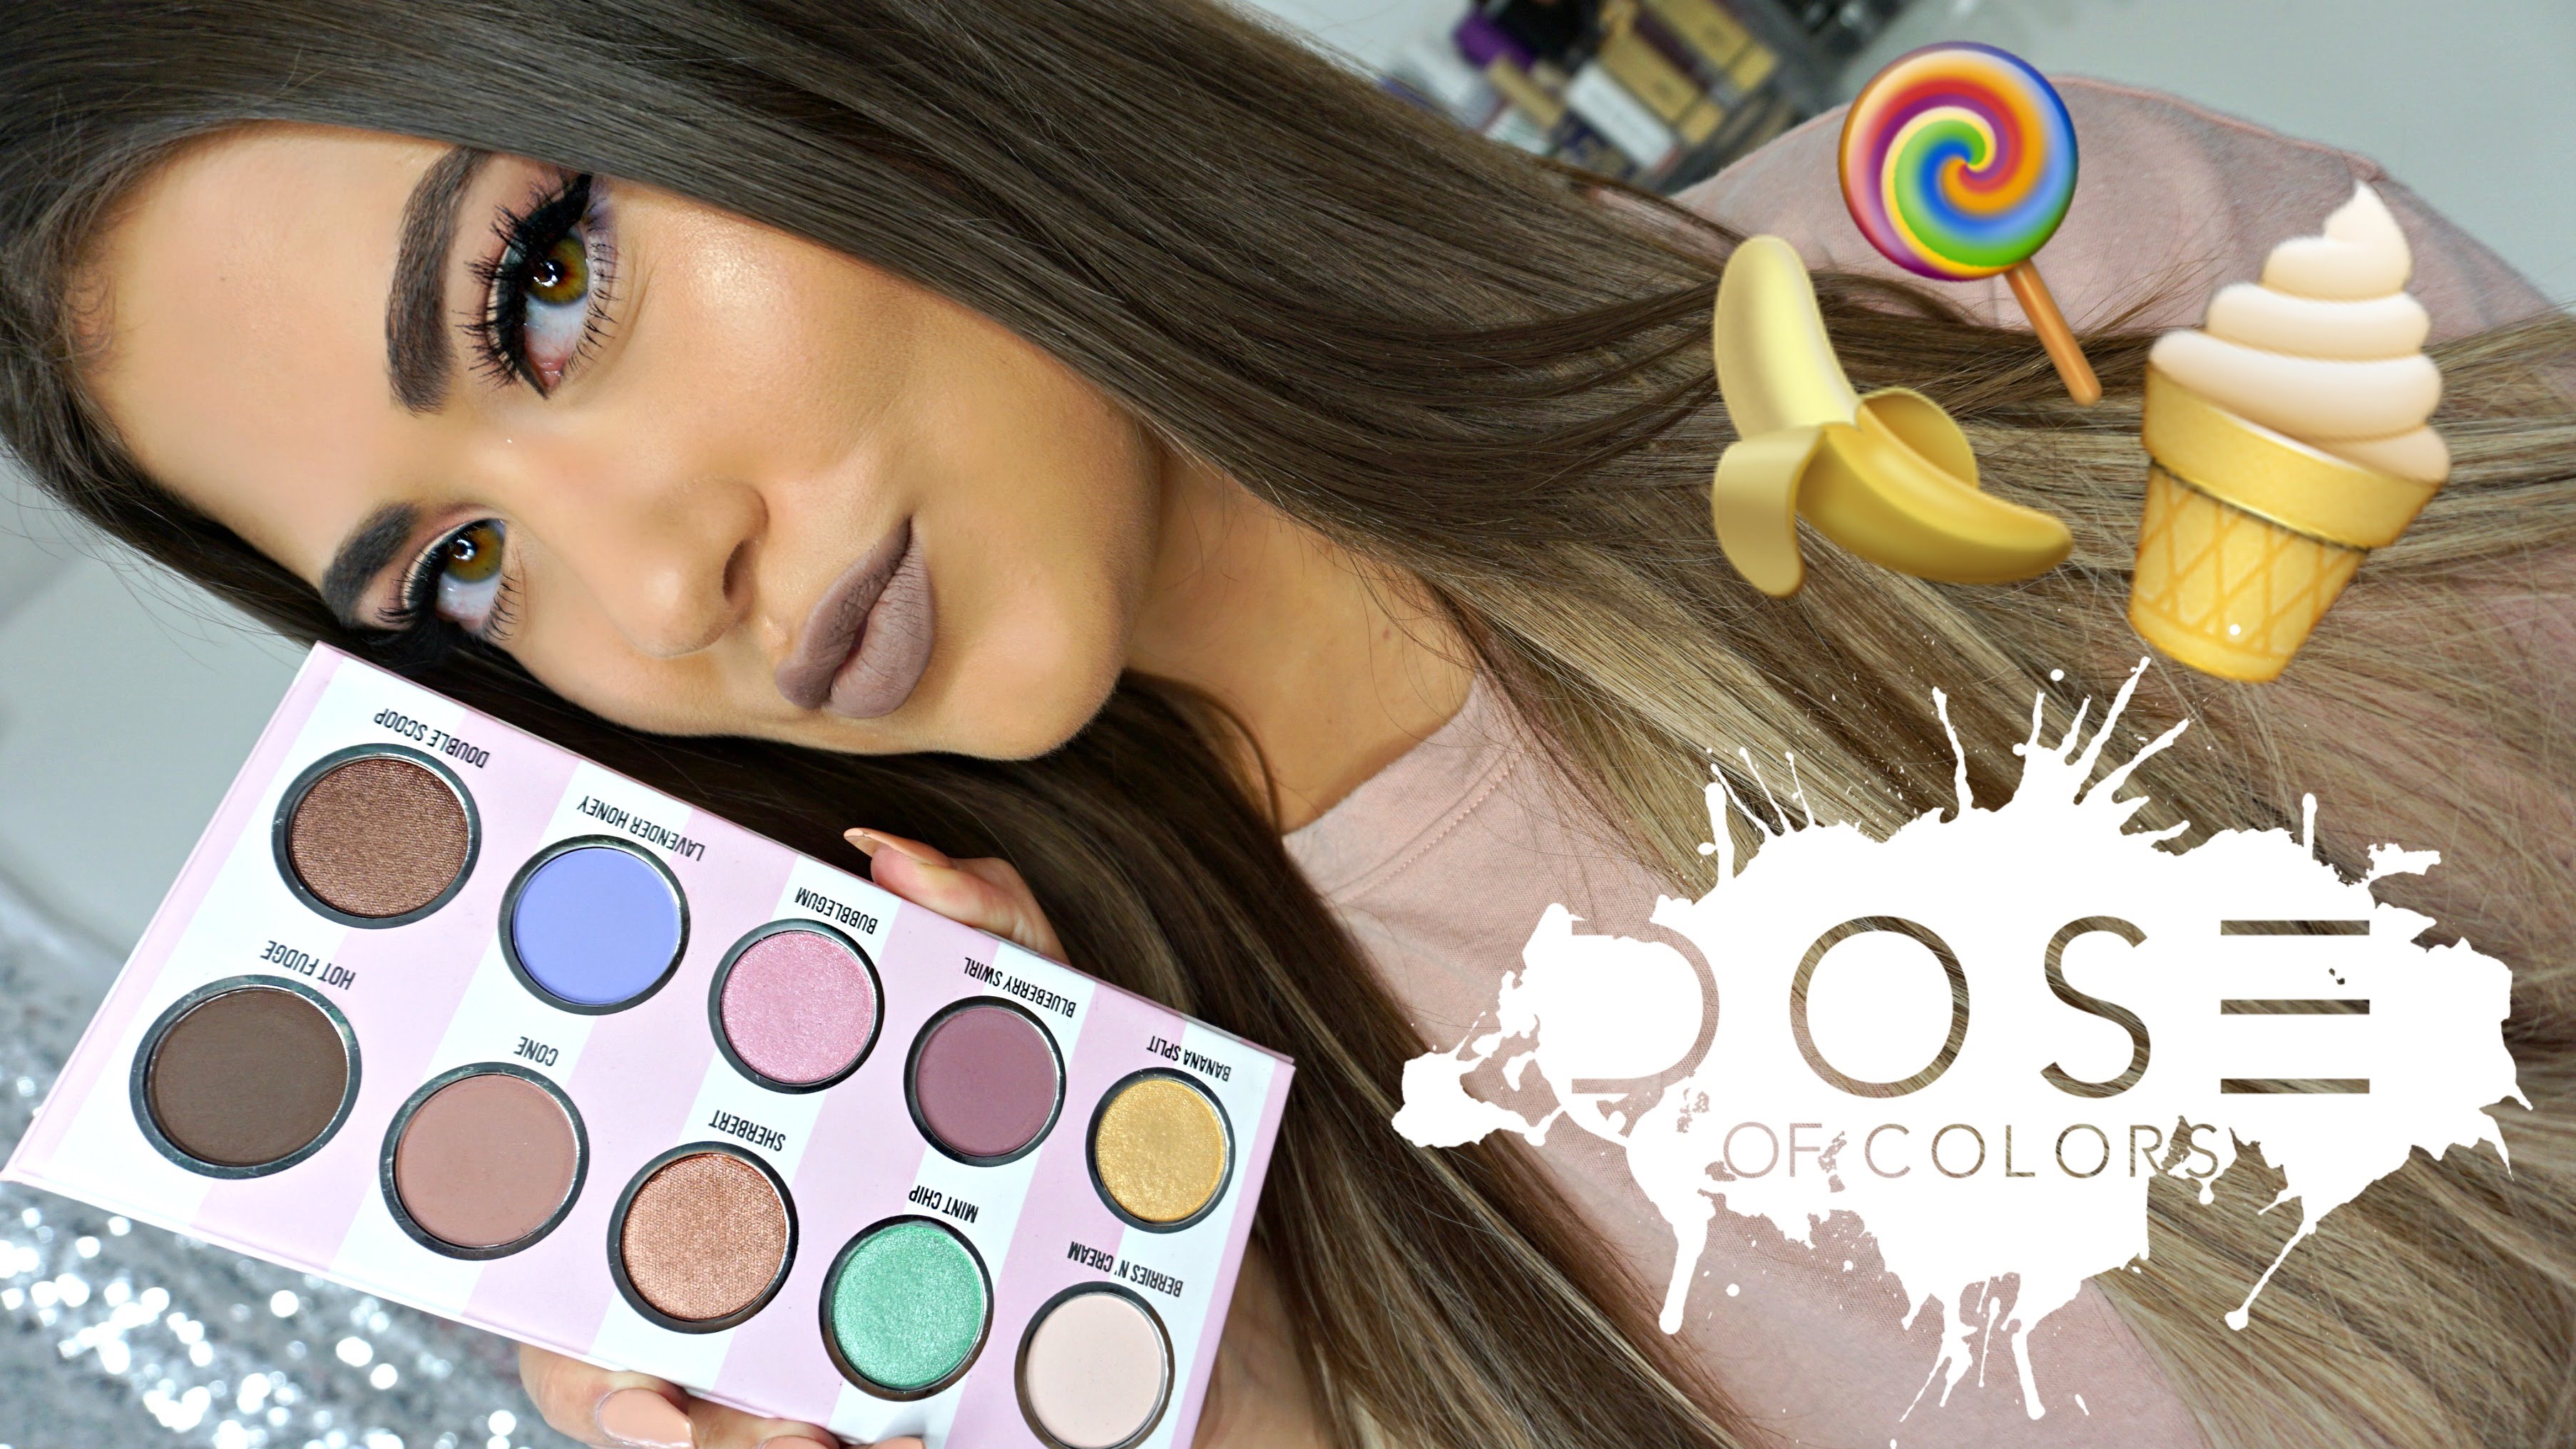 NEW Dose Of Colors EyesCream Palette! Swatches & Review - YouTube